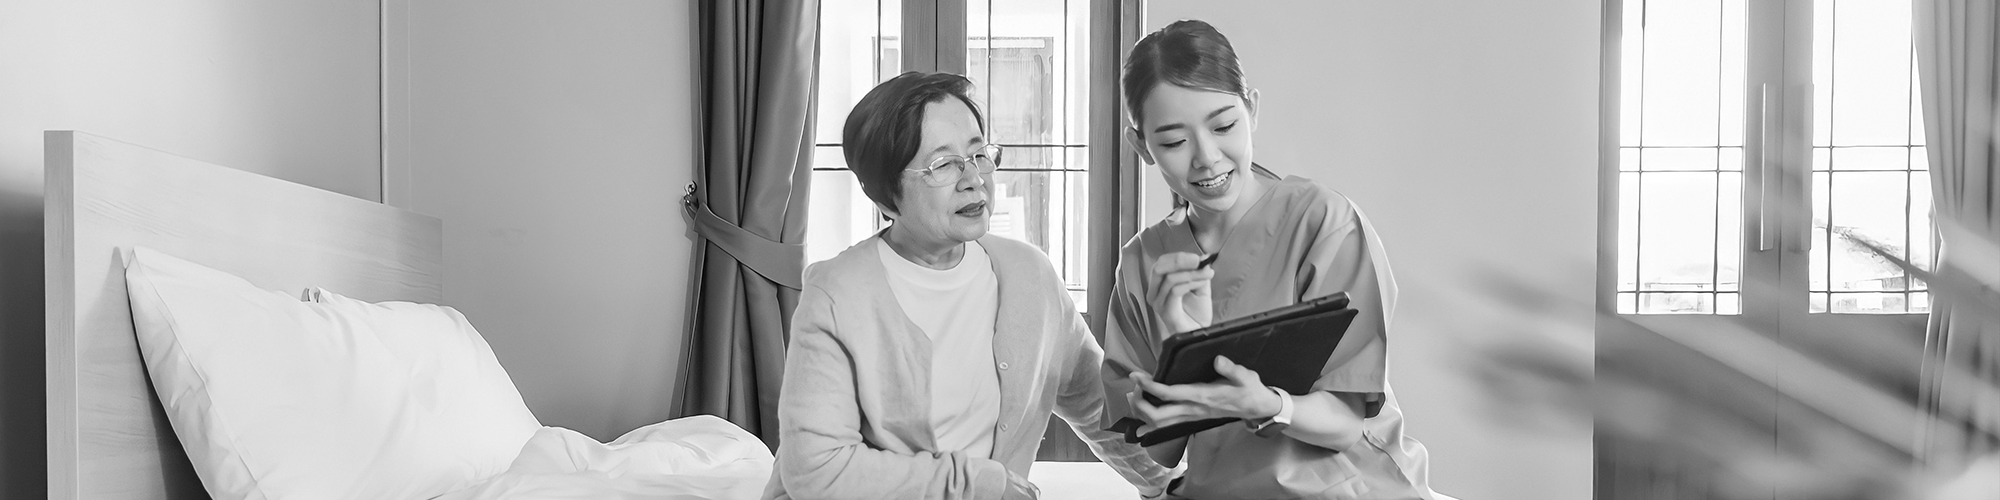 Woman sitting on a bed with a nurse who is reading questions from a tablet